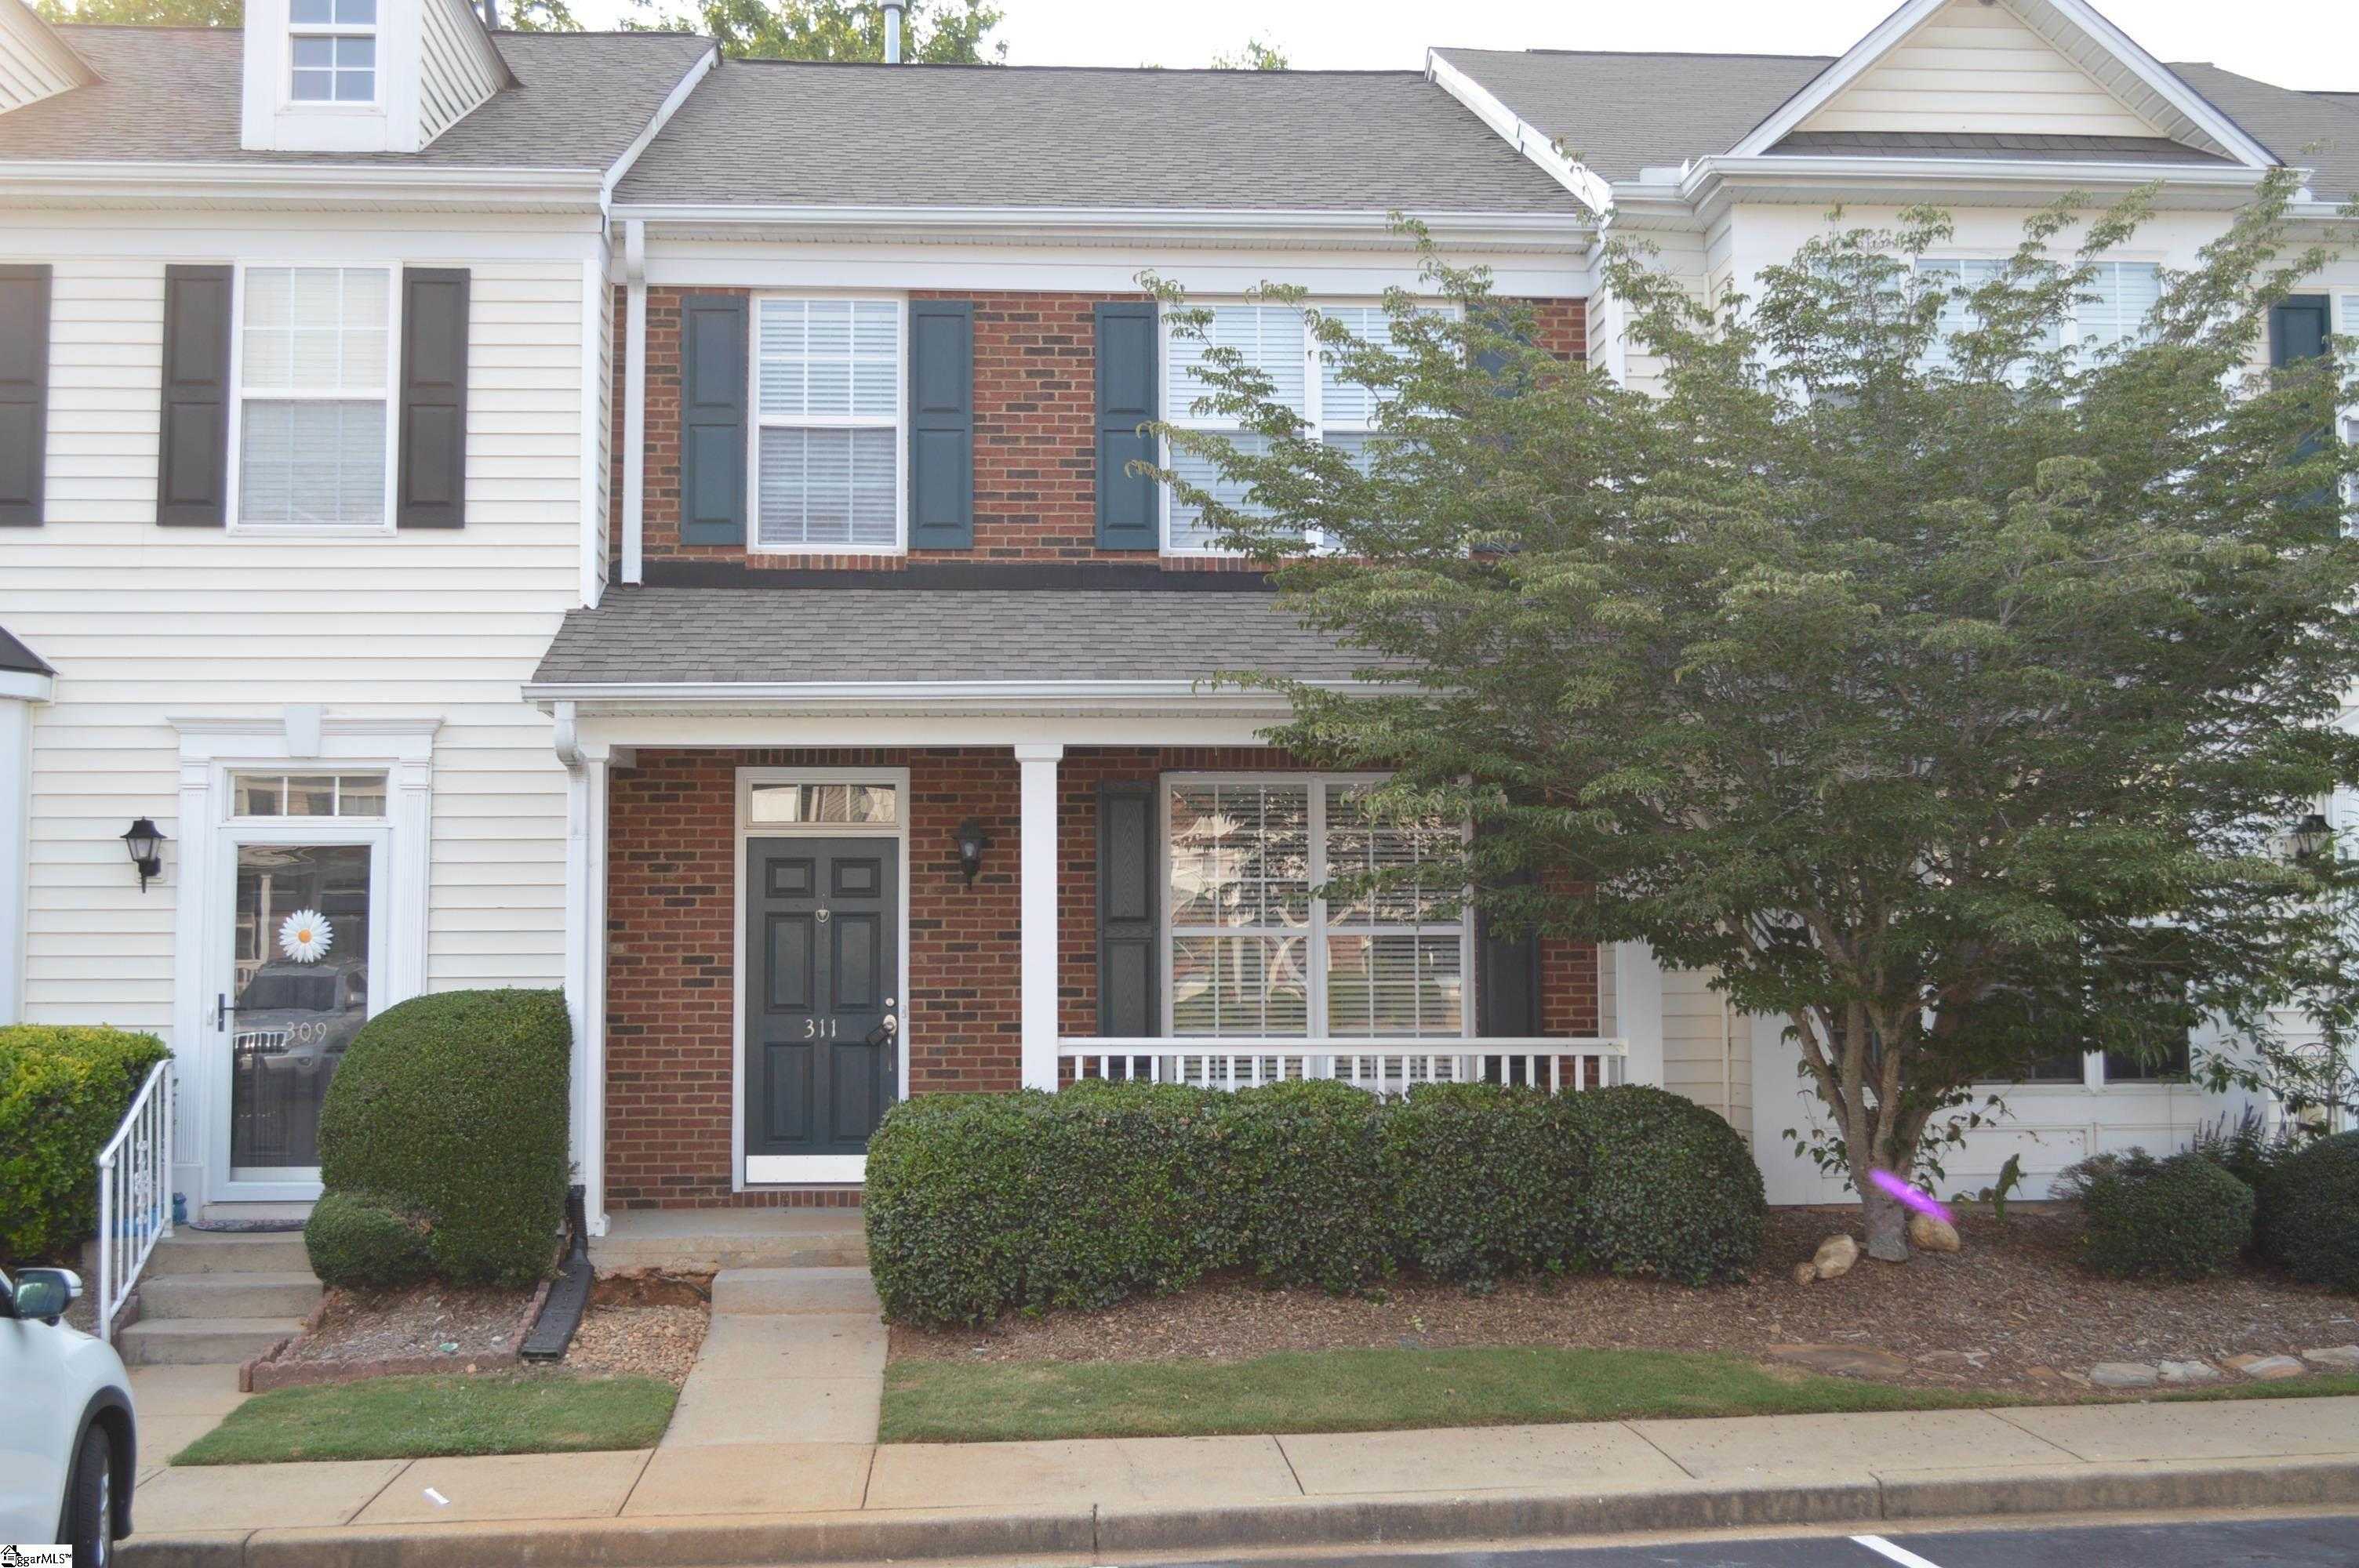 View Greer, SC 29650 townhome